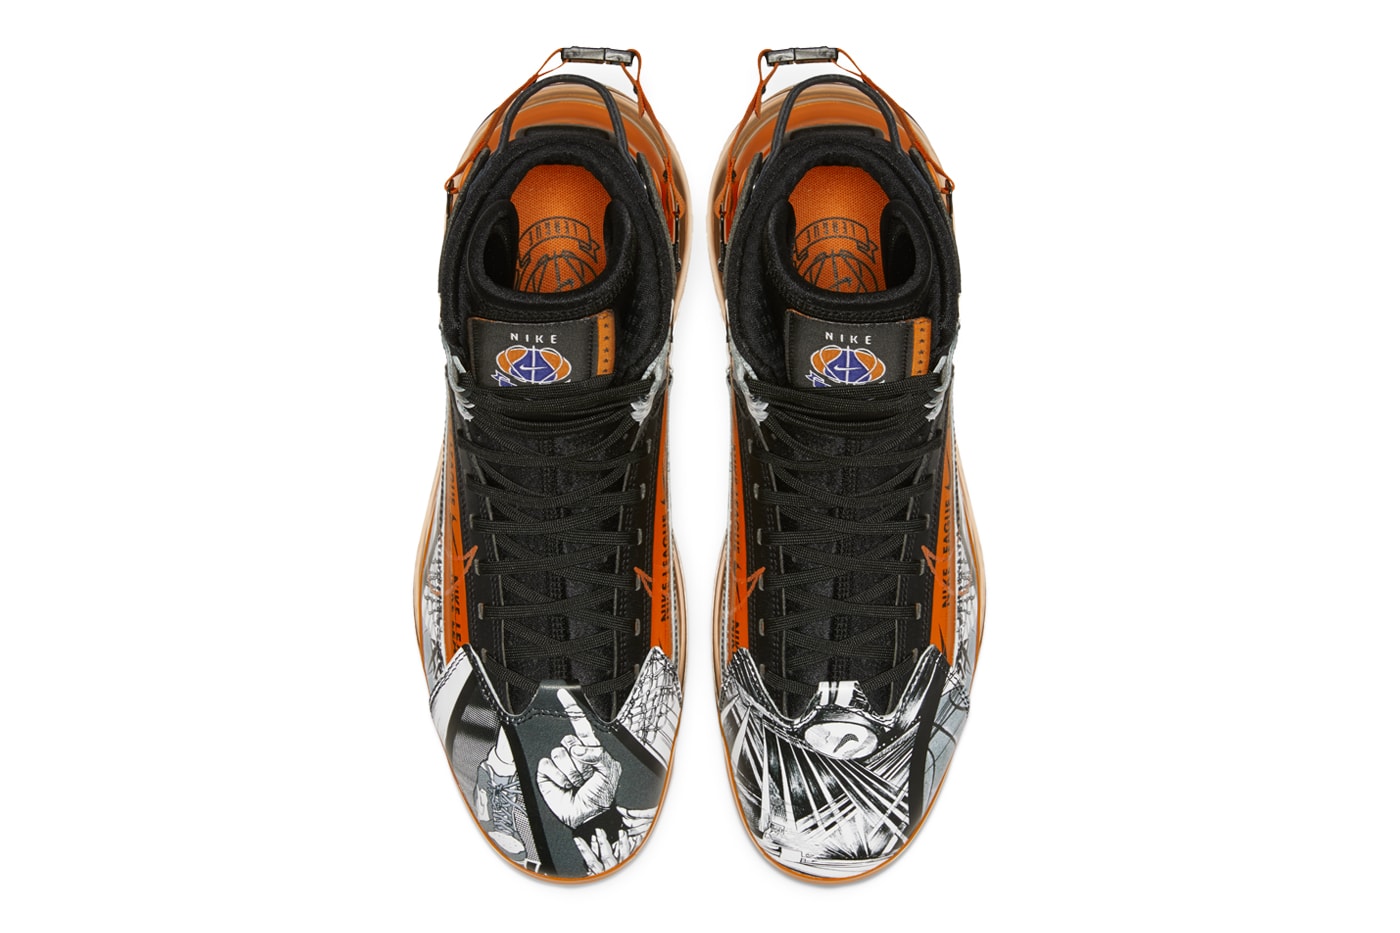 Nike Air Max 720 Saturn March Madness Release  NCAA basketball NBA sneakers shoes orange black ci1959 036 hbl high school basketball league greater china orange only once 